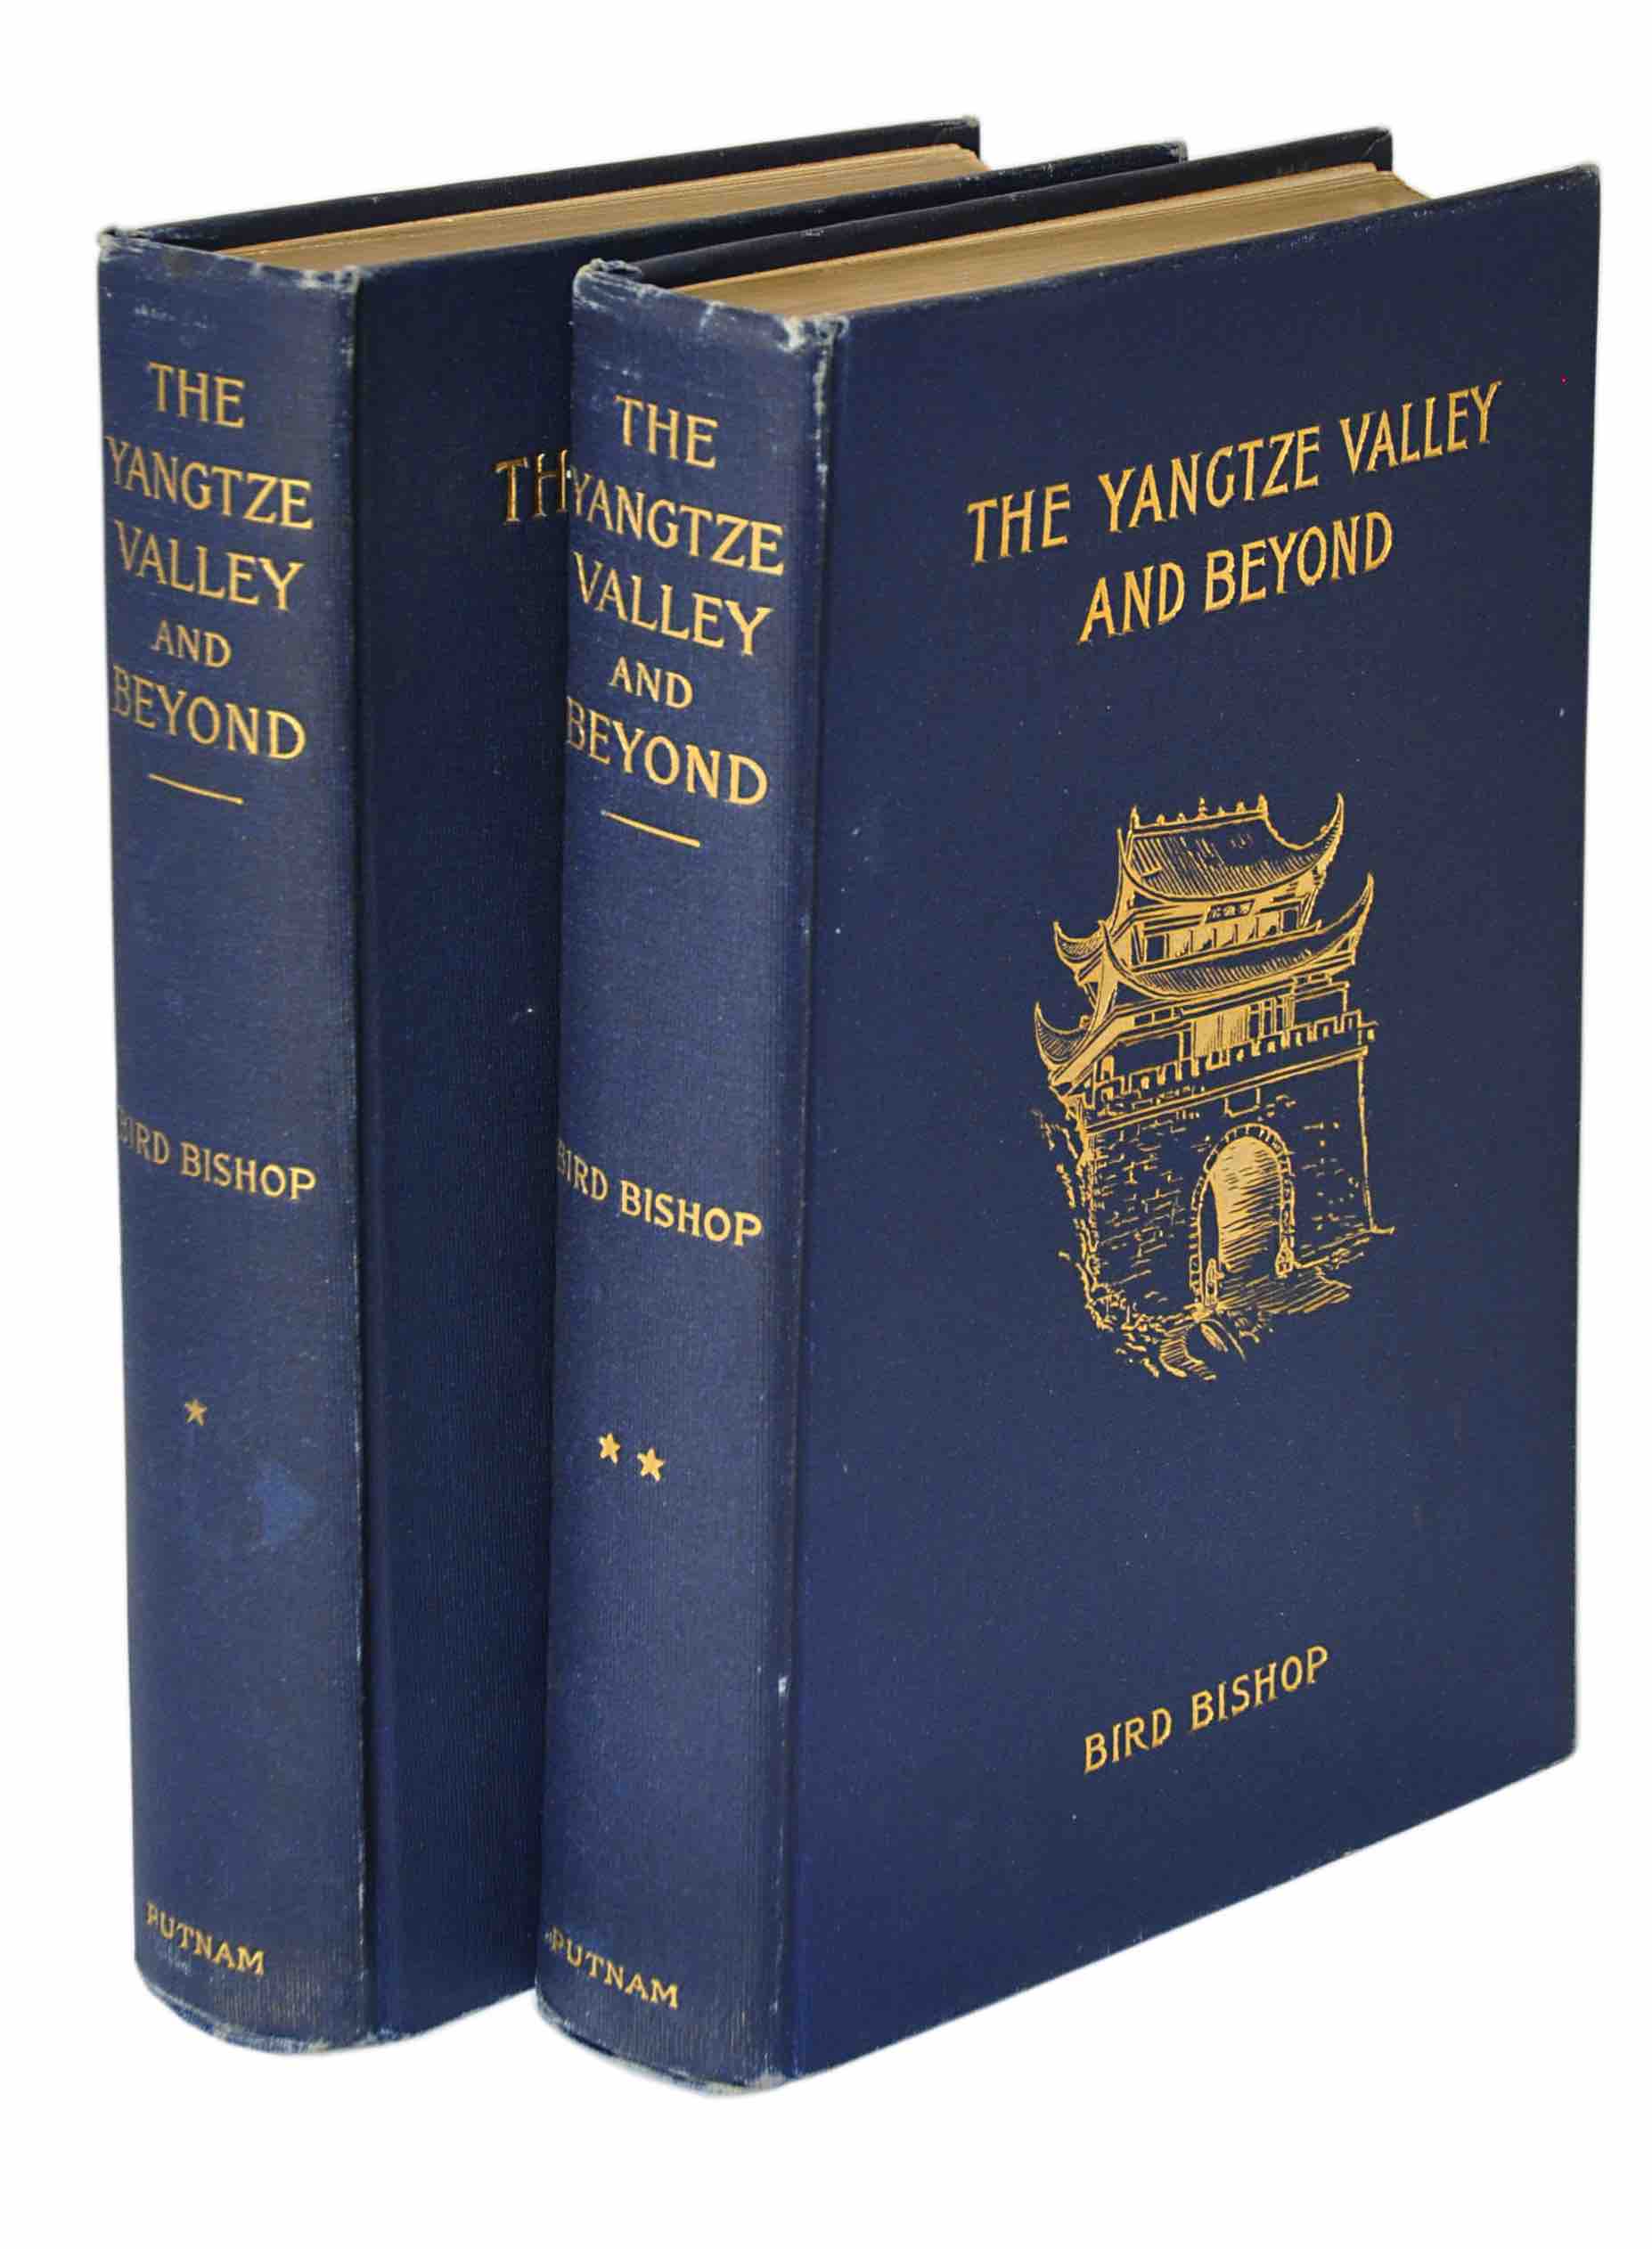 BIRD, ISABELLA LUCY (Mrs. Bishop): - The Yangtze Valley and Beyond. An Account of Journeys in China, Chiefly in the Province of Sze Chuan and Among the Man-Tze of the Somo Territory. Two volumes. New York, G.P. Putnam's Sons, & London, John Murray, 1900.